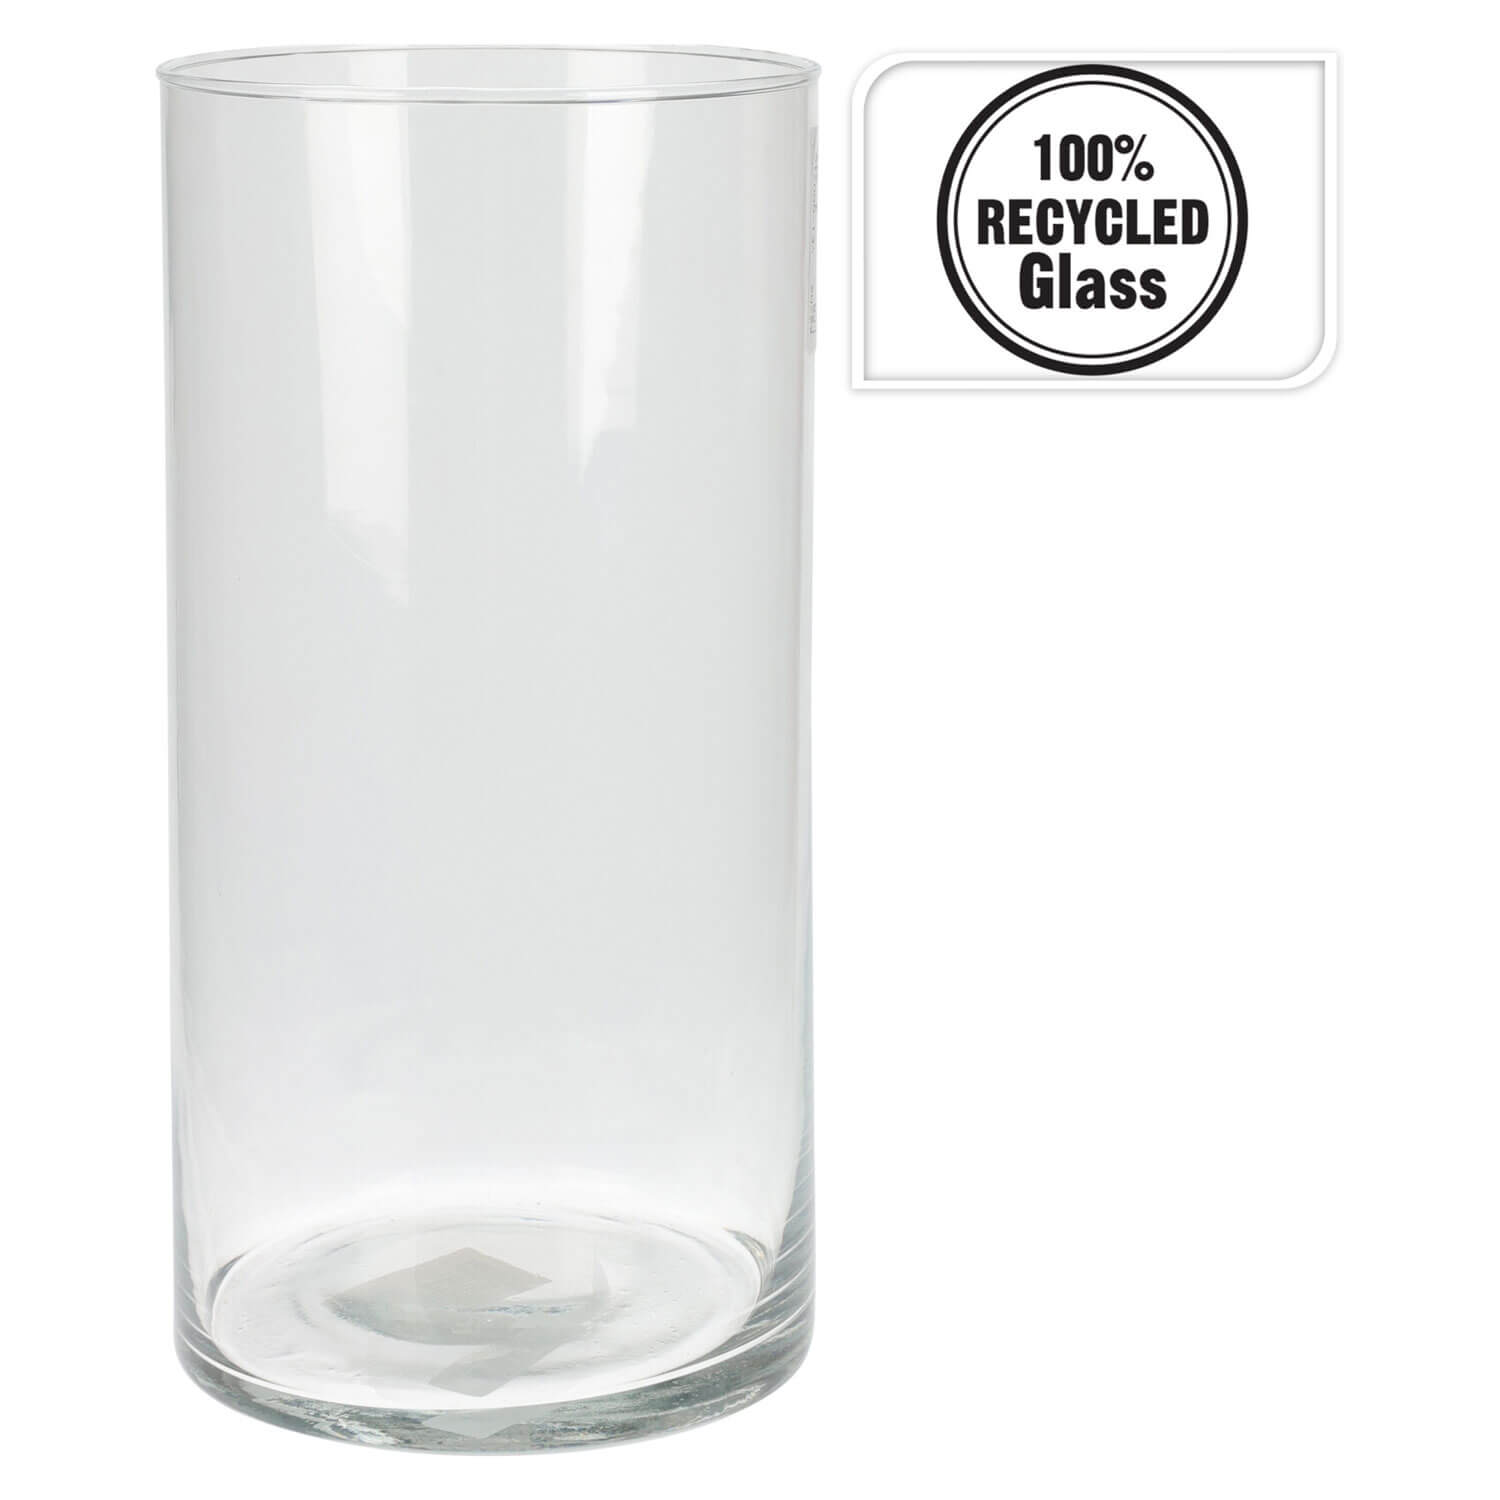 The Home Collection Dia Glass Vase 1 Shaws Department Stores